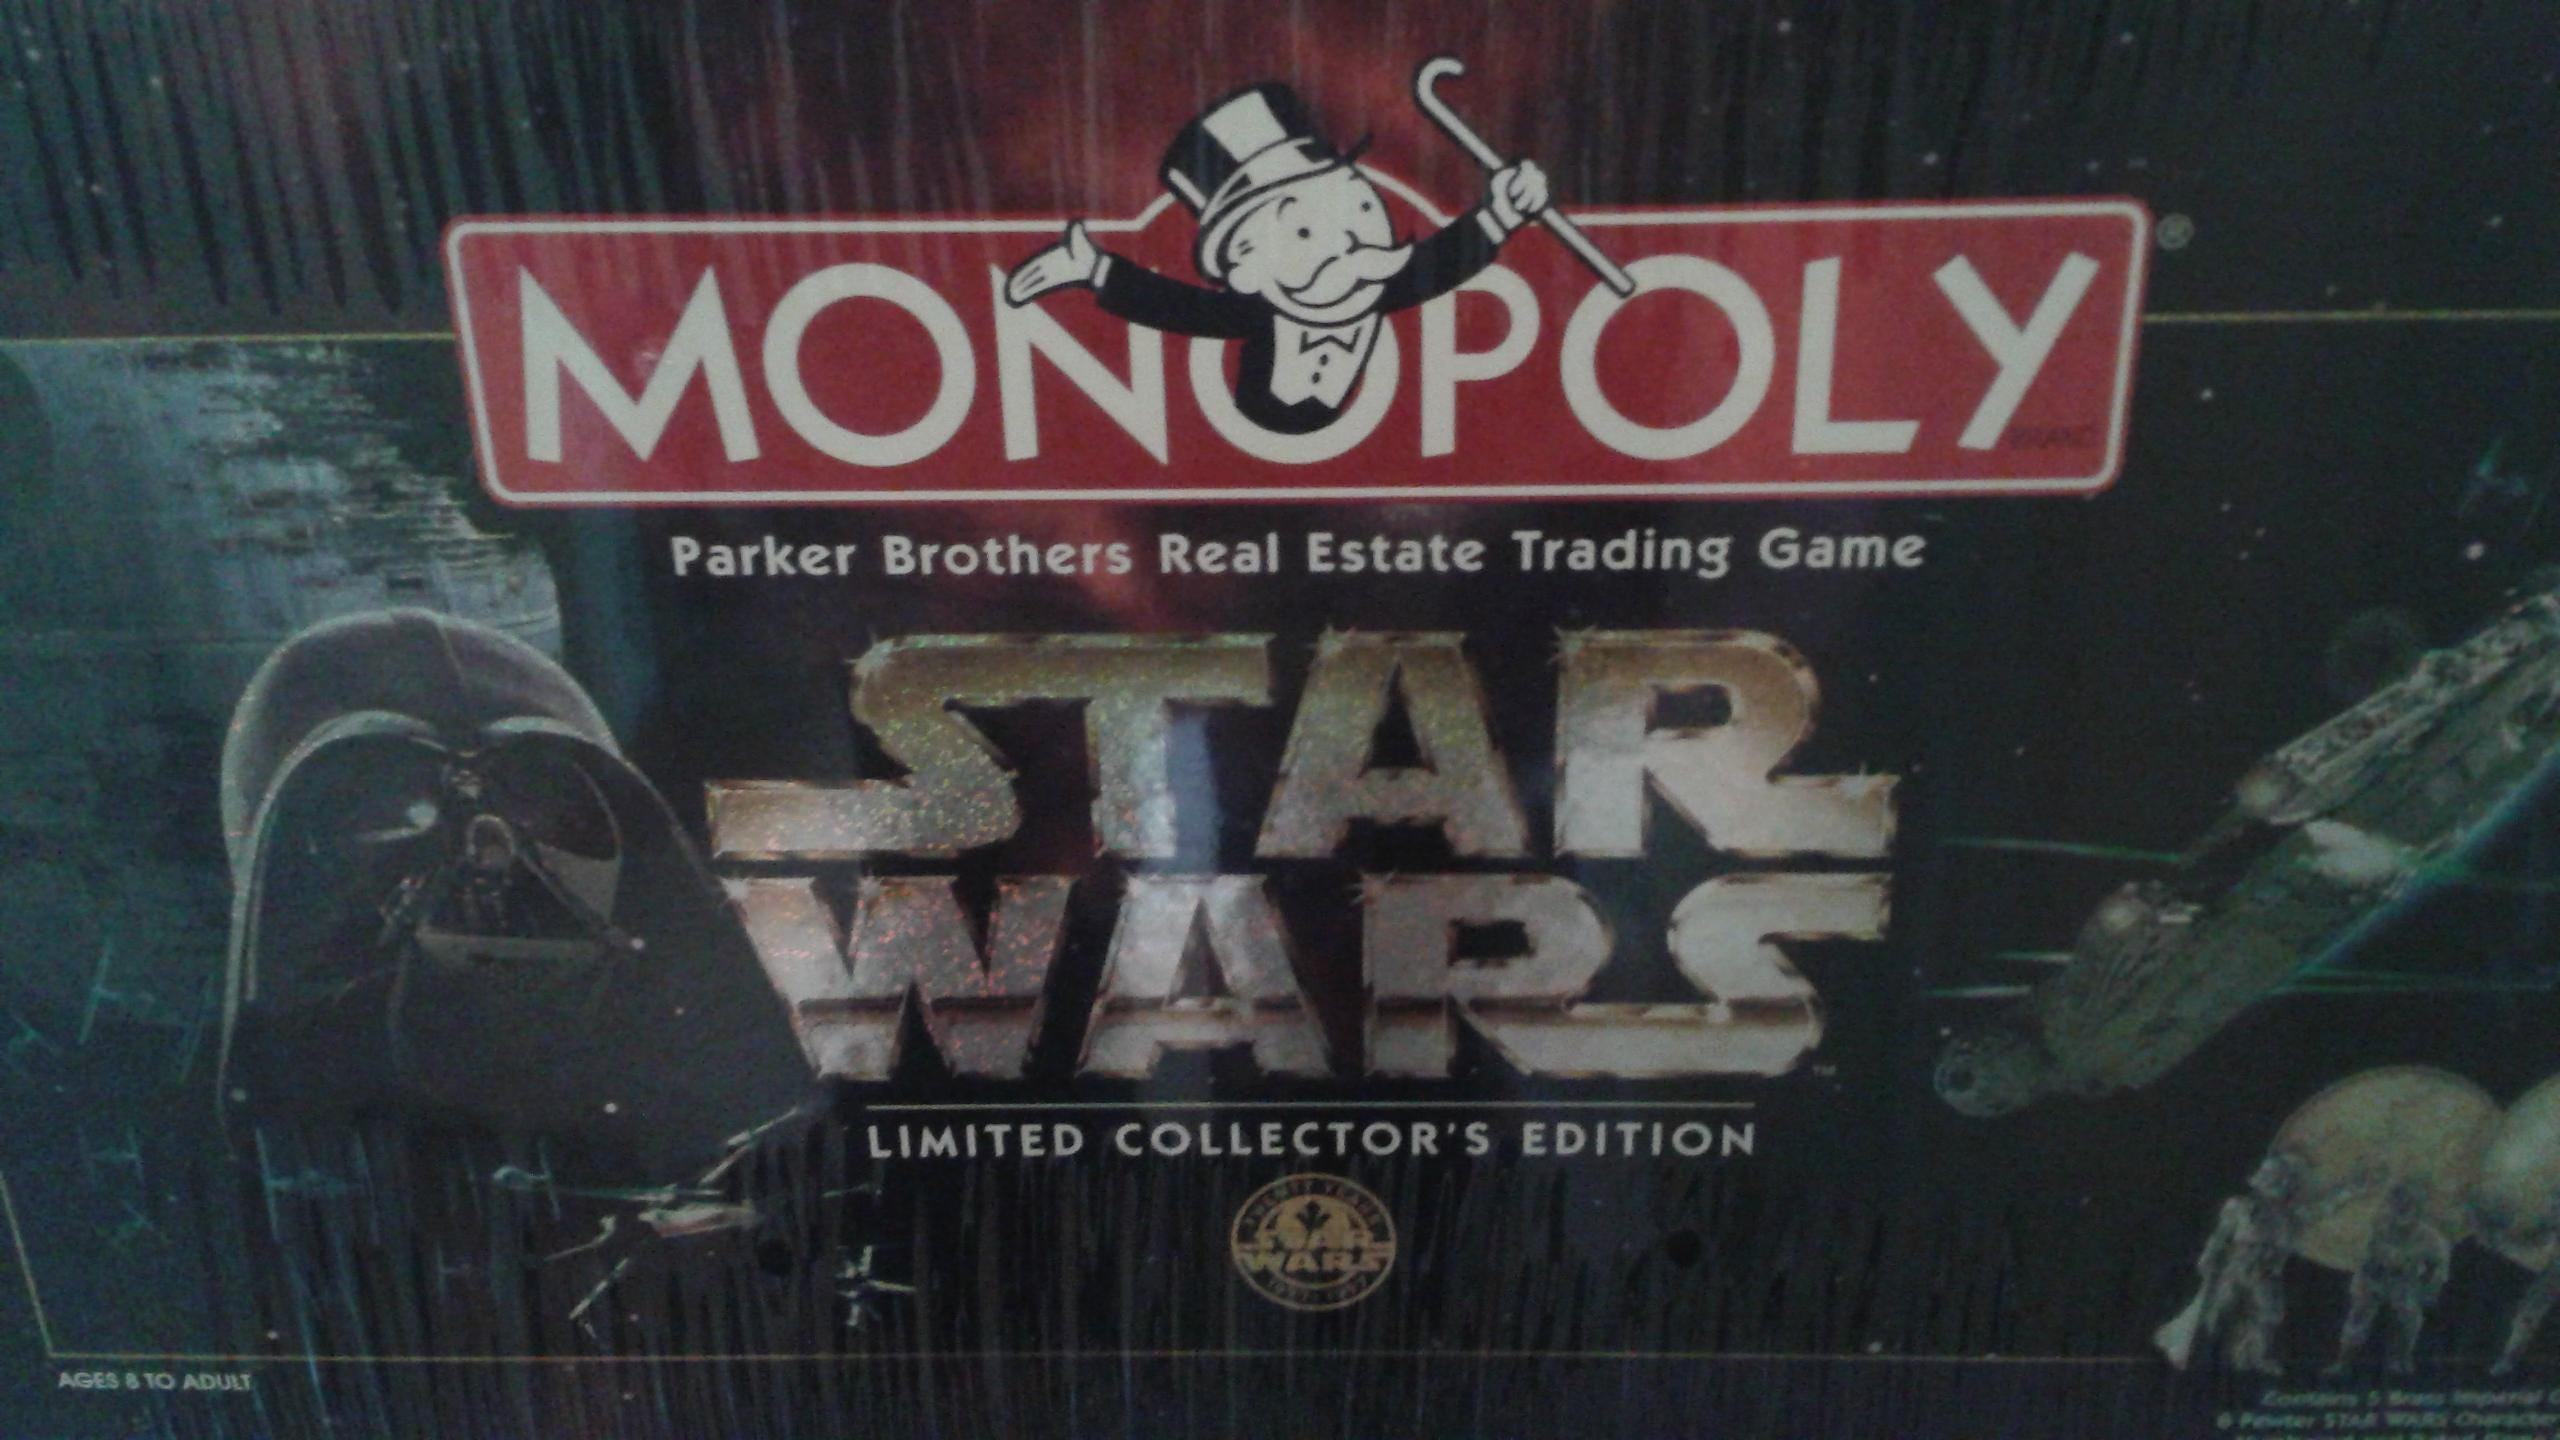 Parker Brothers Monopoly 1996 Limited Collectors Edition 20th Anniversary Complete Game 40786 for sale online 